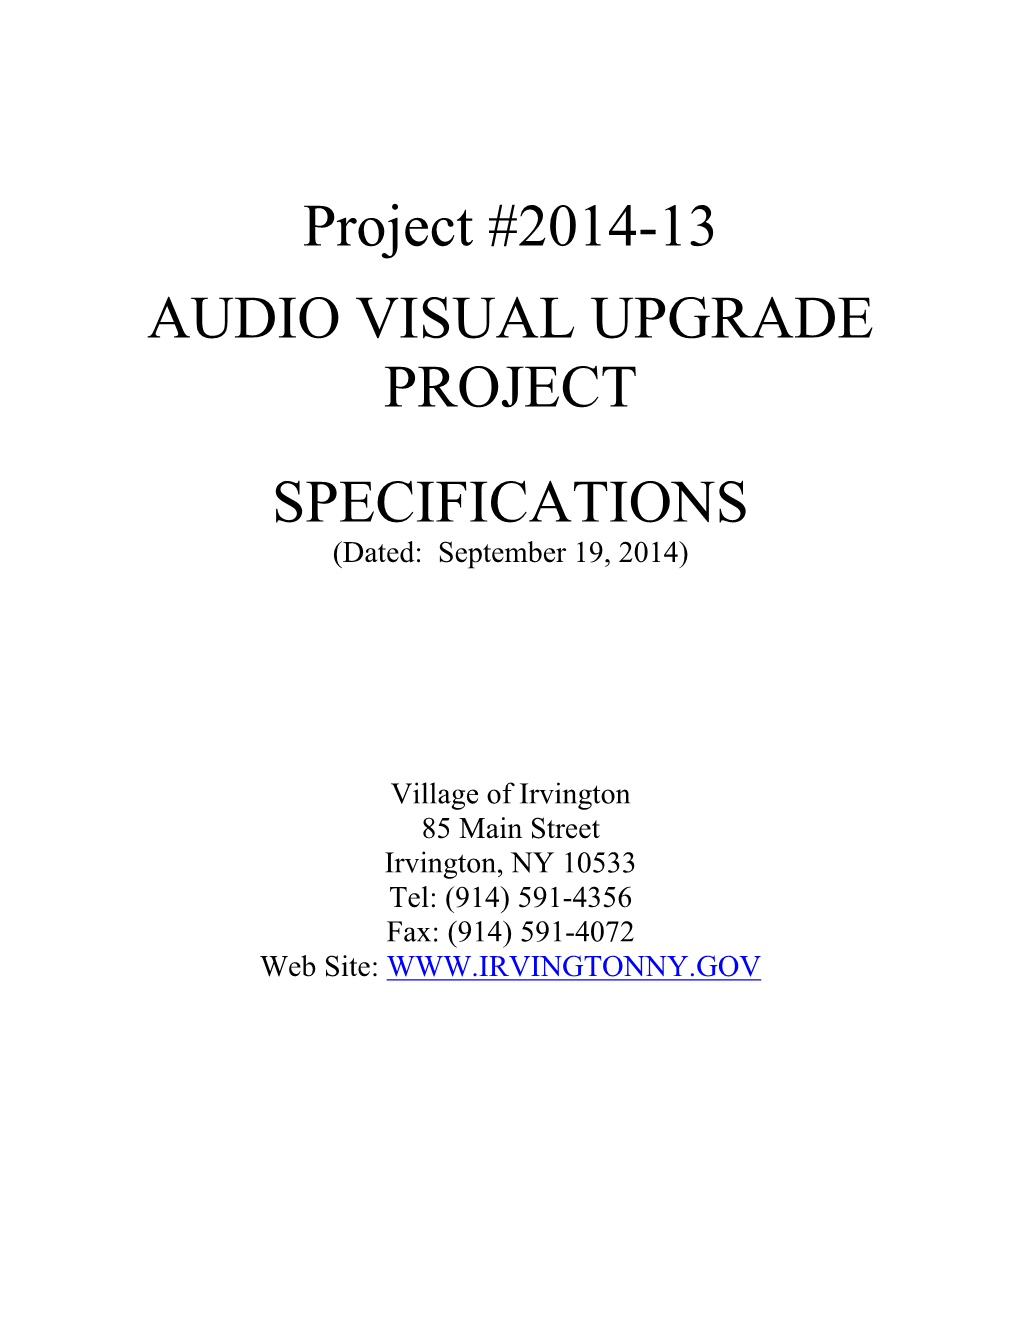 Project #2014-13 AUDIO VISUAL UPGRADE PROJECT SPECIFICATIONS